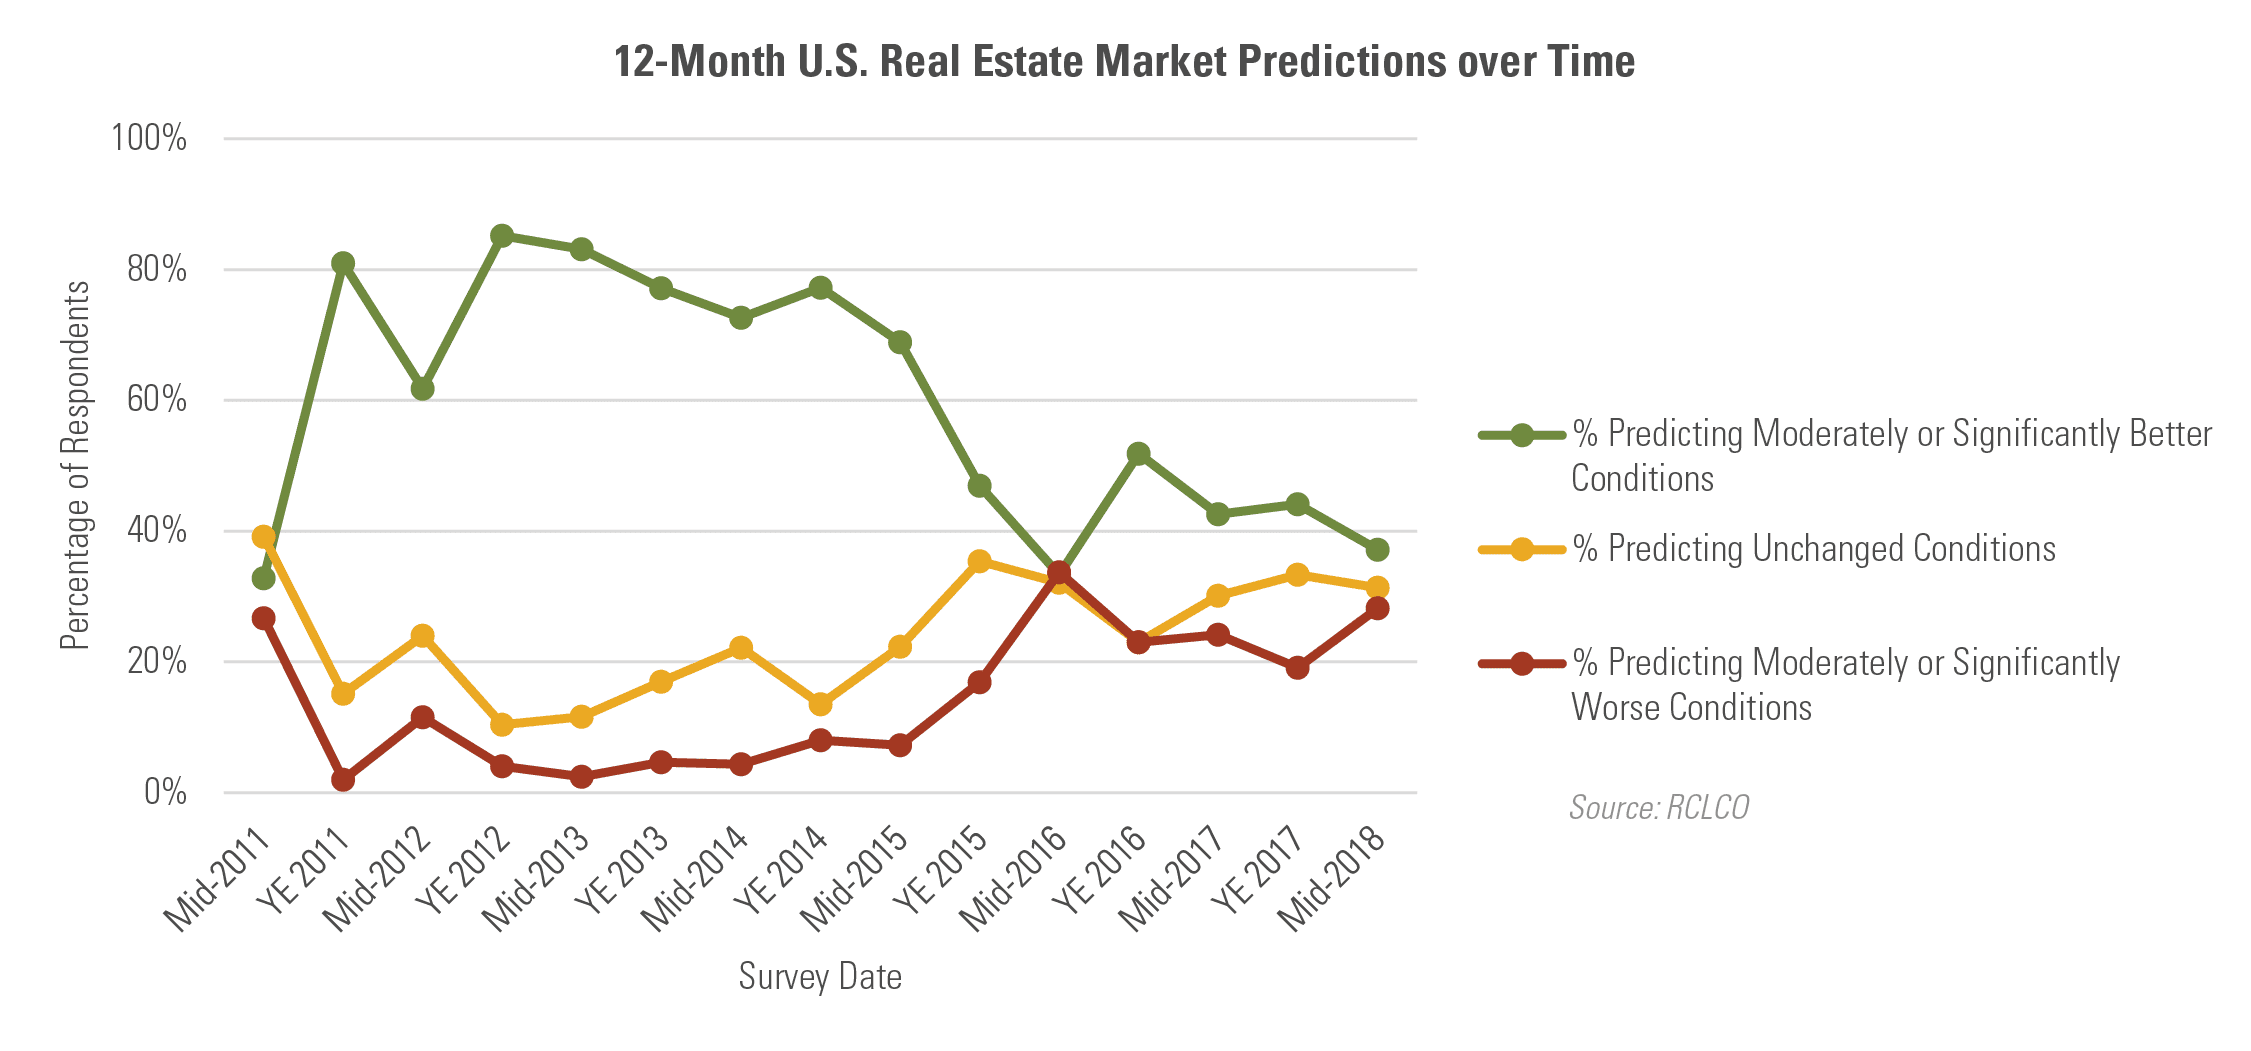 12 Month U.S. Real Estate Market Predictions over Time